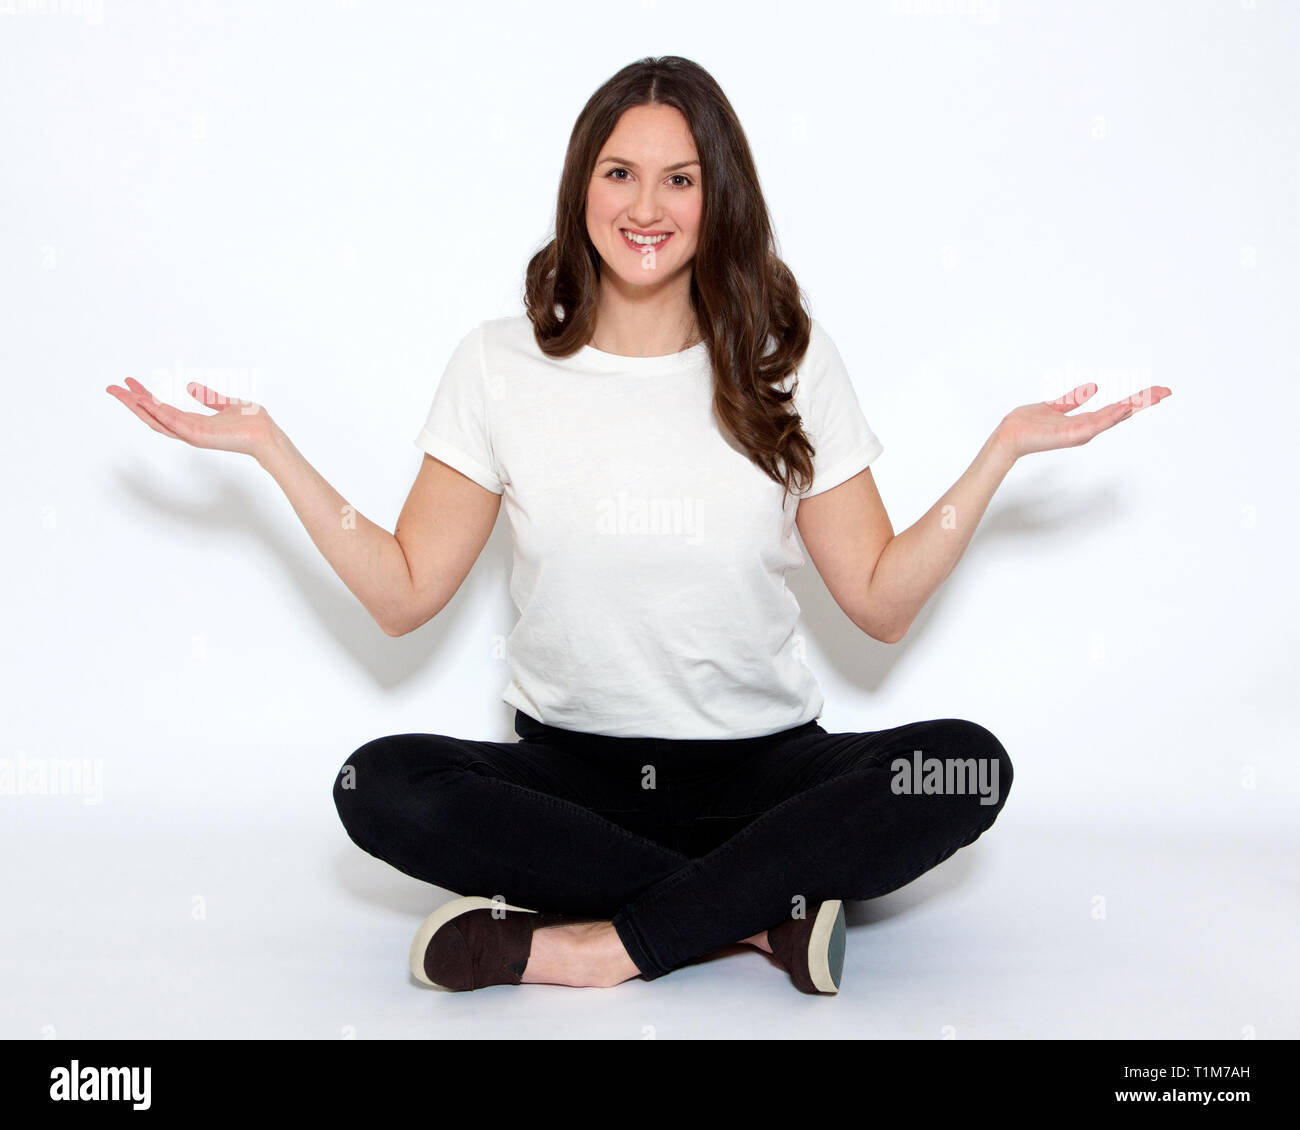 Woman sitting cross-legged holding her hands out sideways wearing a white top and black jeans Stock Photo